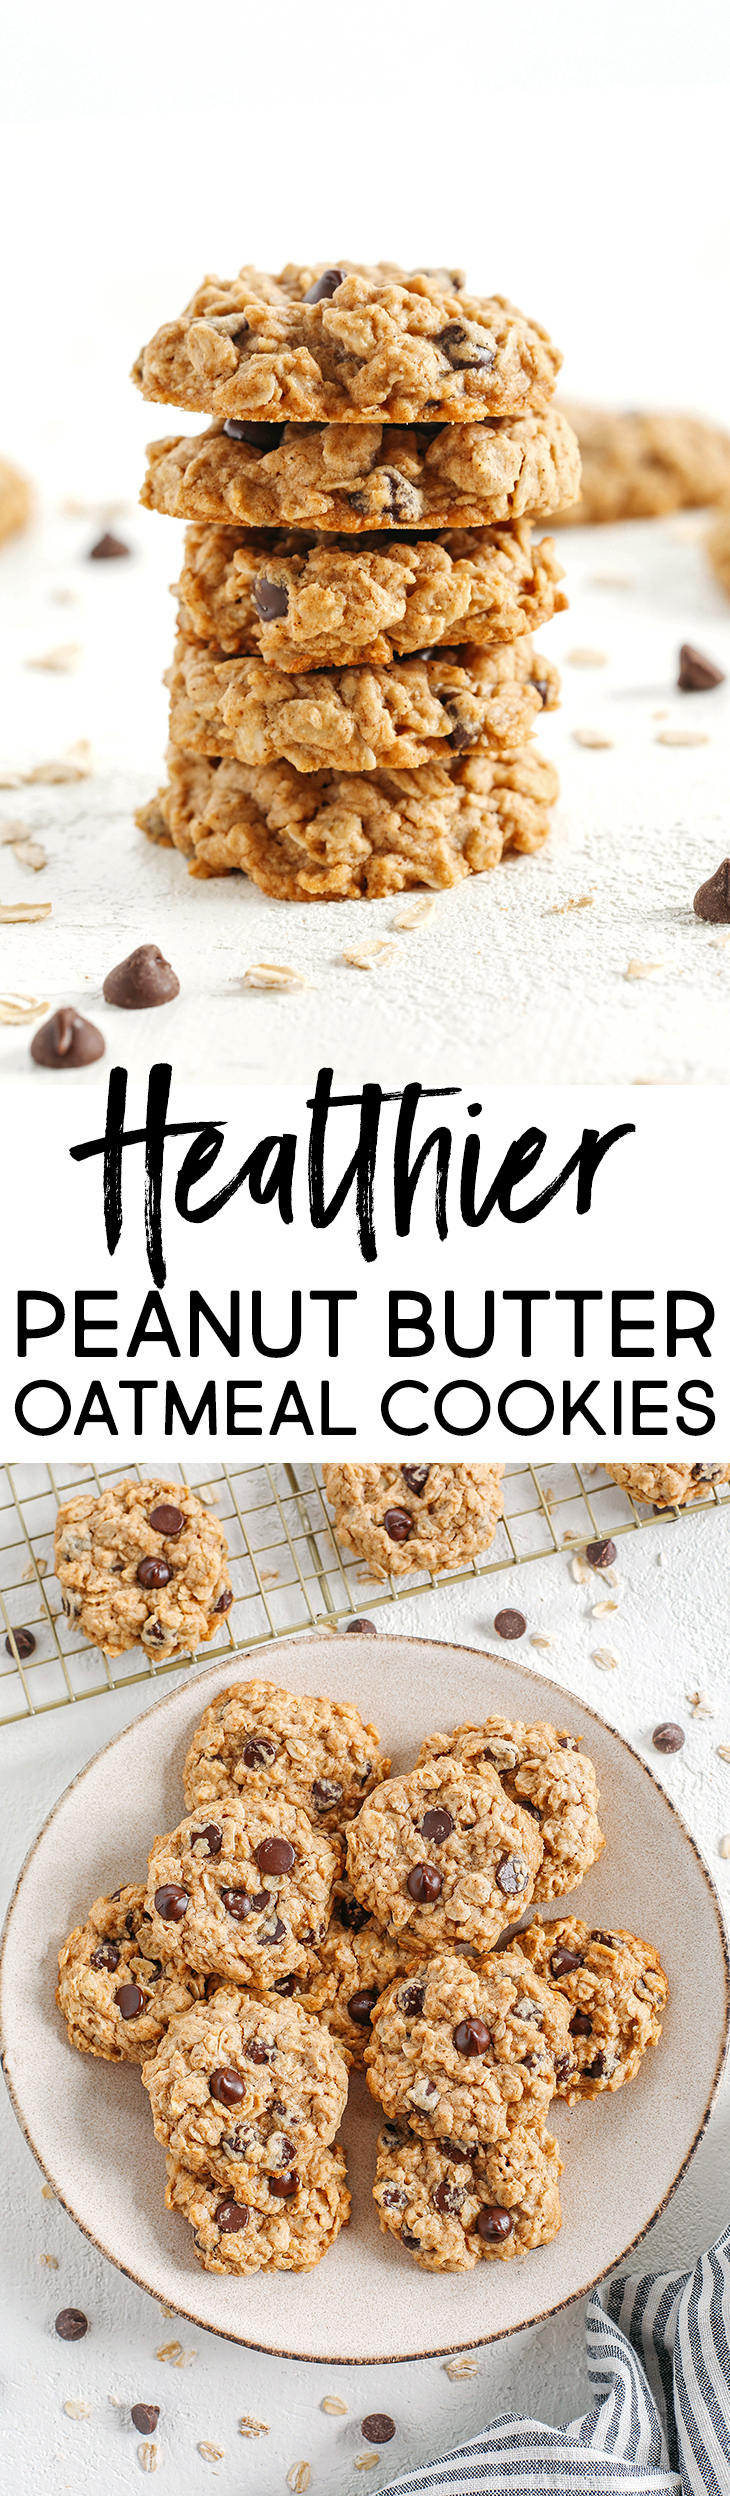 Soft and chewy Peanut Butter Oatmeal Cookies made healthier with wholesome ingredients, zero butter or refined sugar, and delicious chunks of chocolate in every bite! 